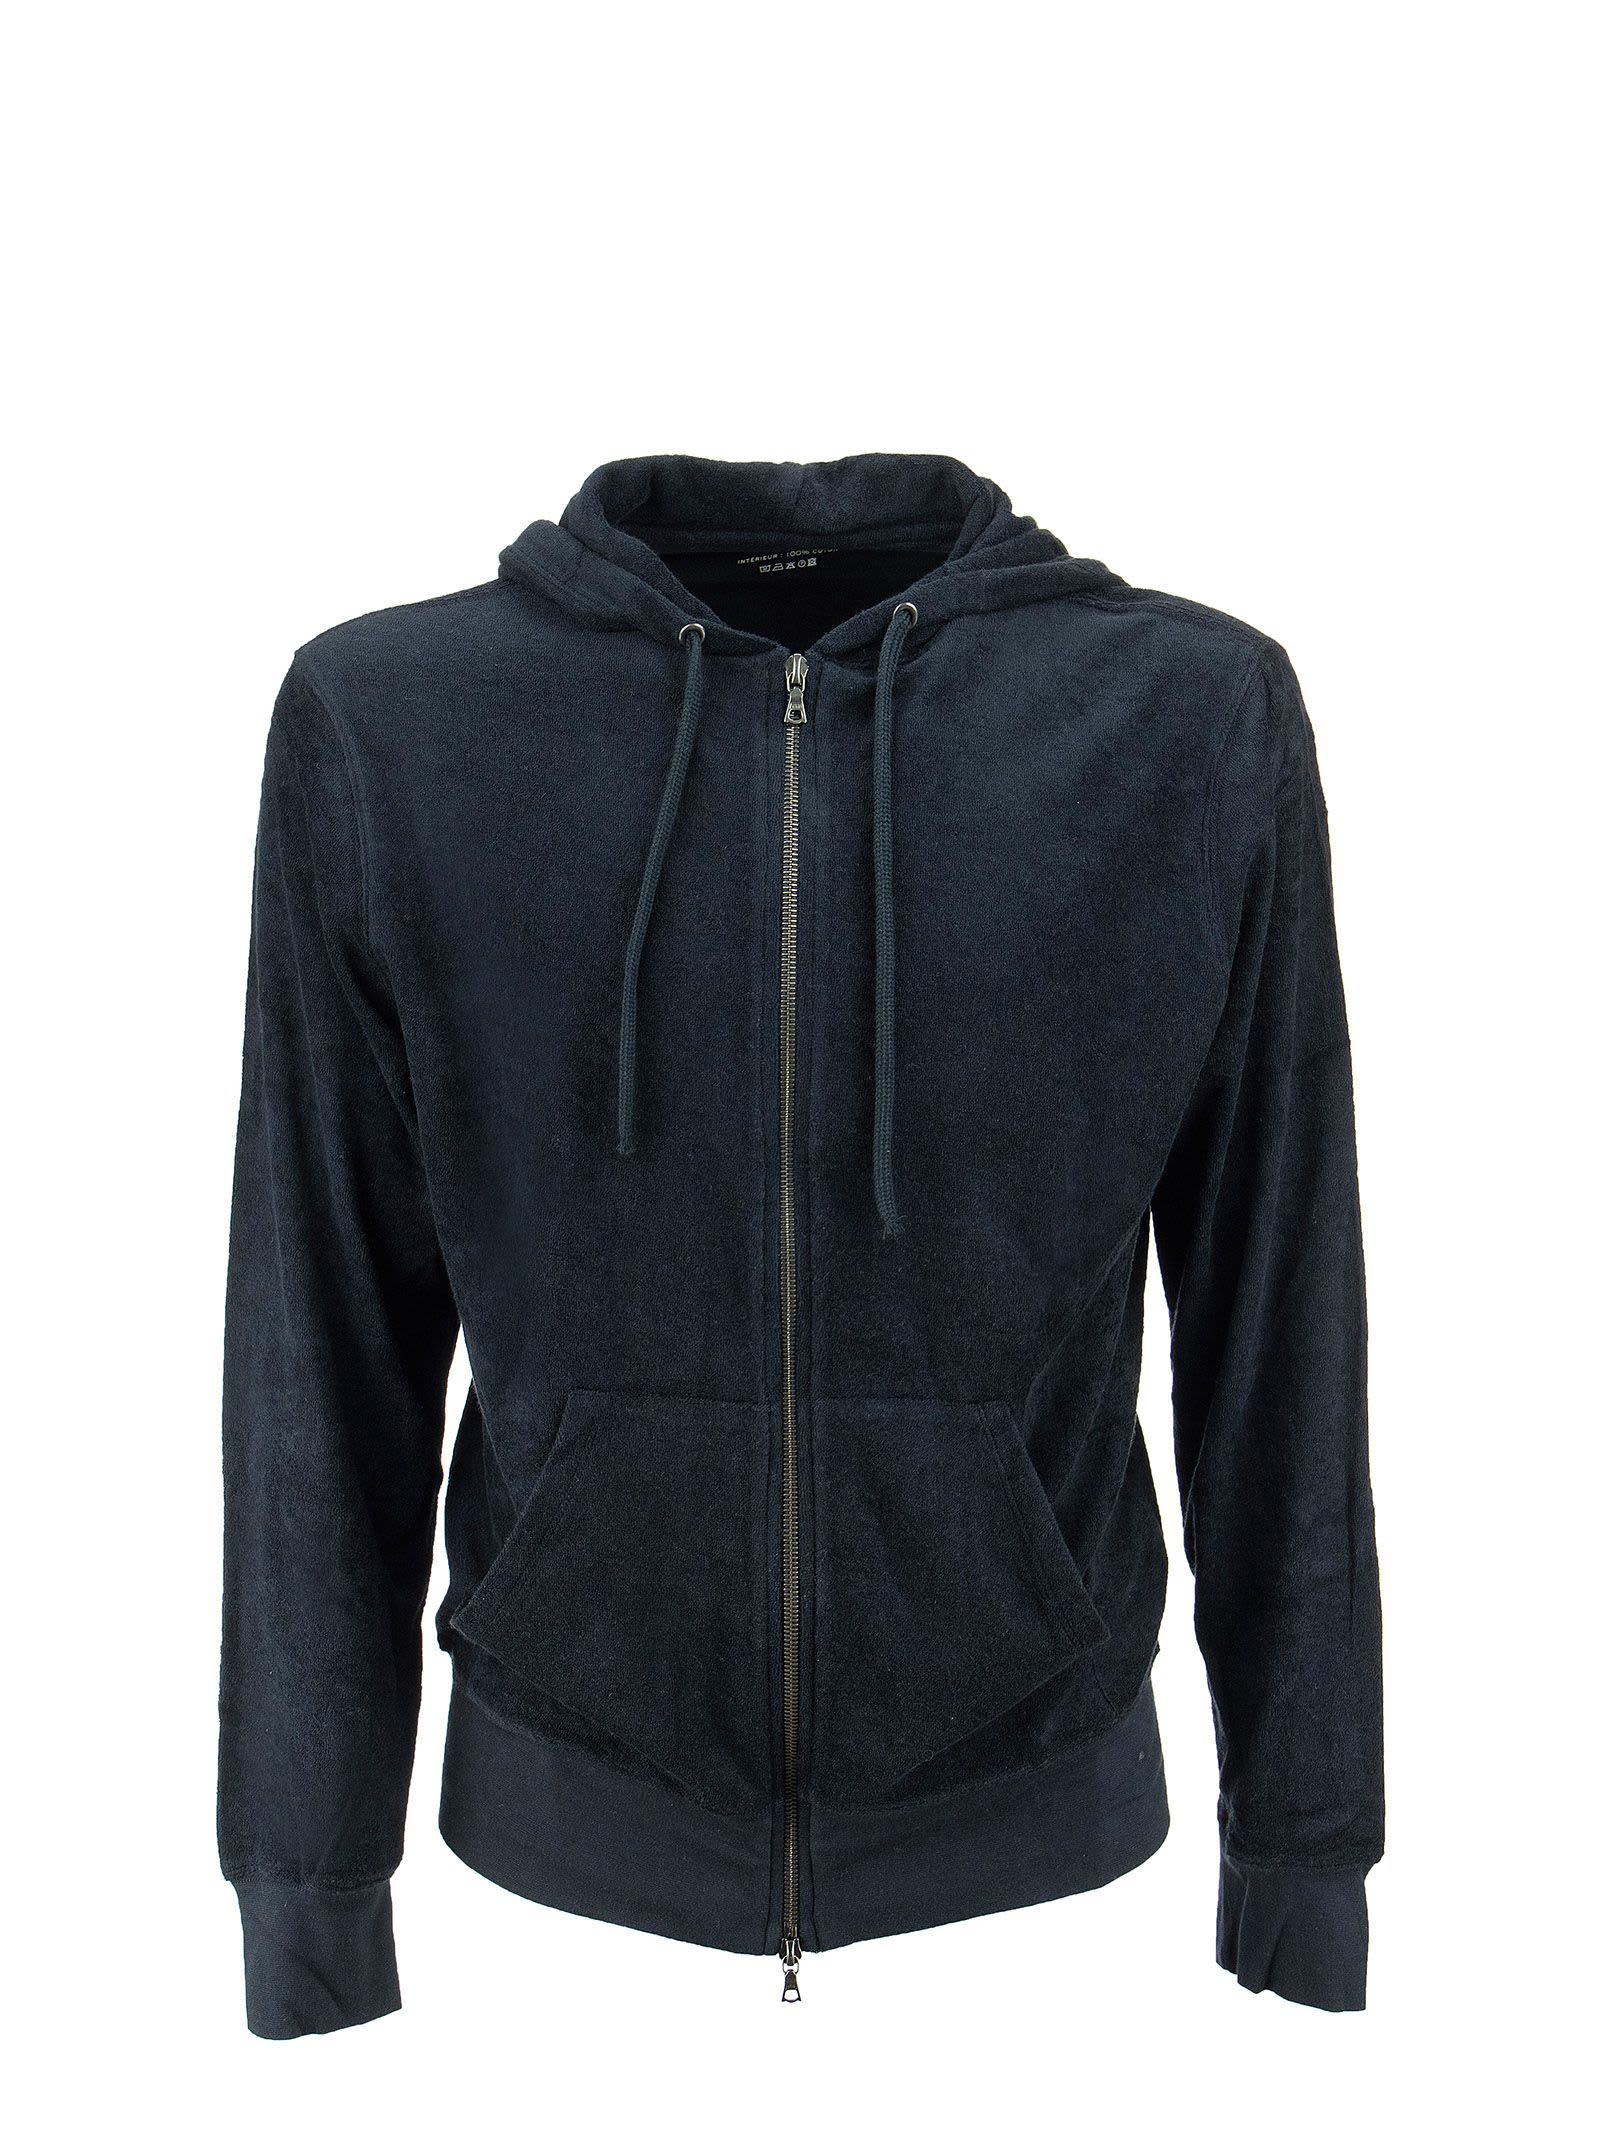 Majestic Filatures Hooded Sweatshirt In Cotton And Modal